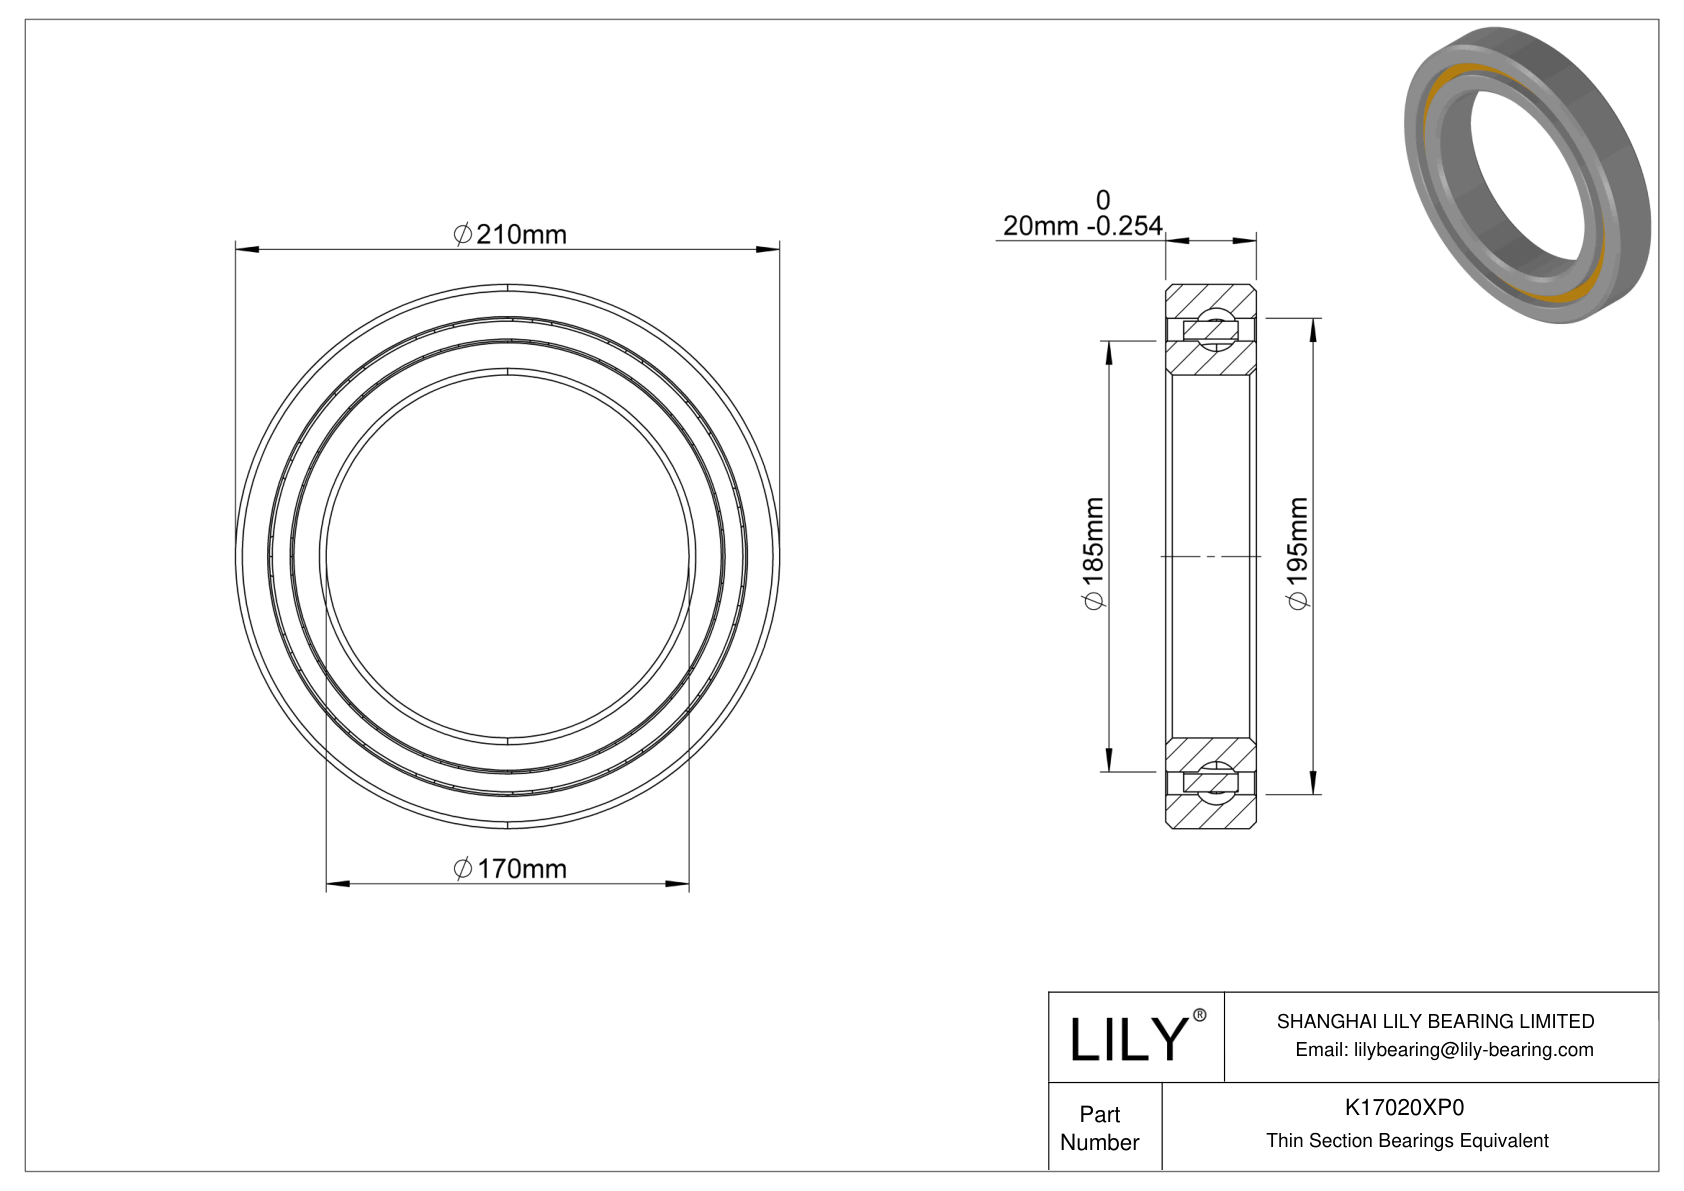 K17020XP0 Constant Section (CS) Bearings cad drawing